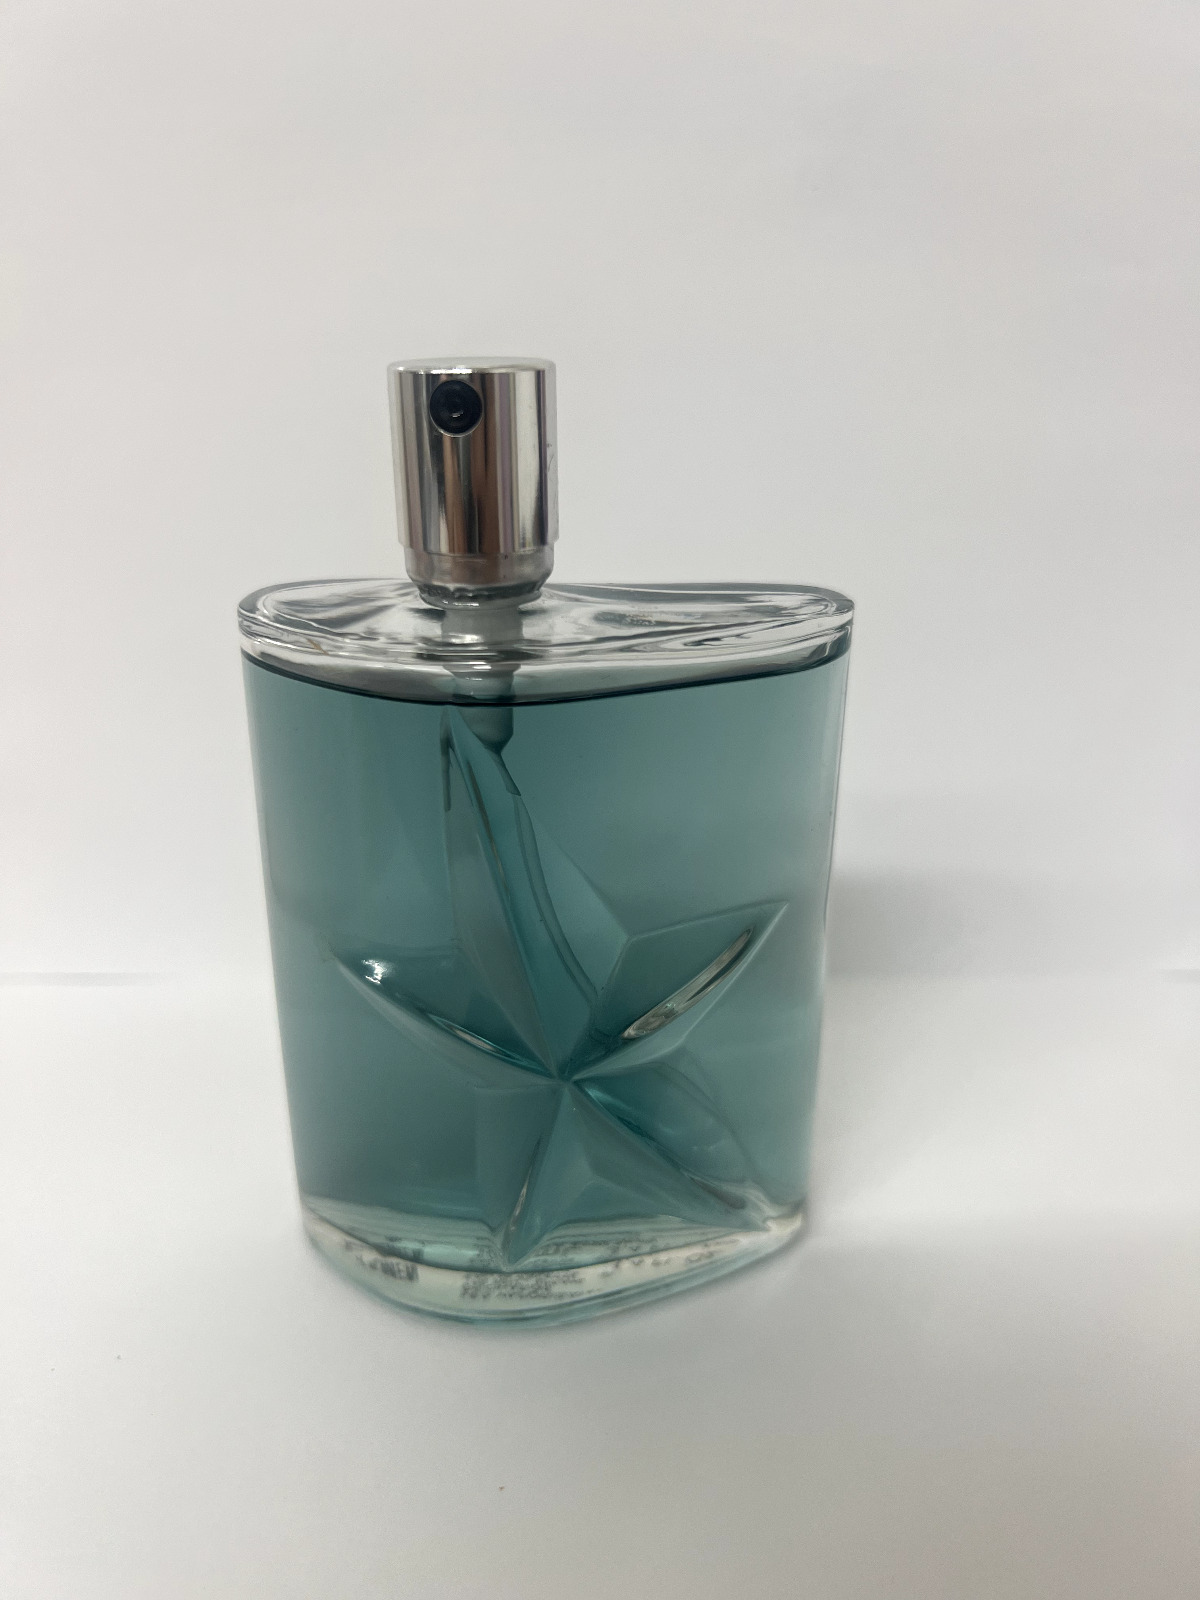 Thierry Mugler Ultra Vintage A Men 3.4FLOZ/100ML *As Shown In Image*